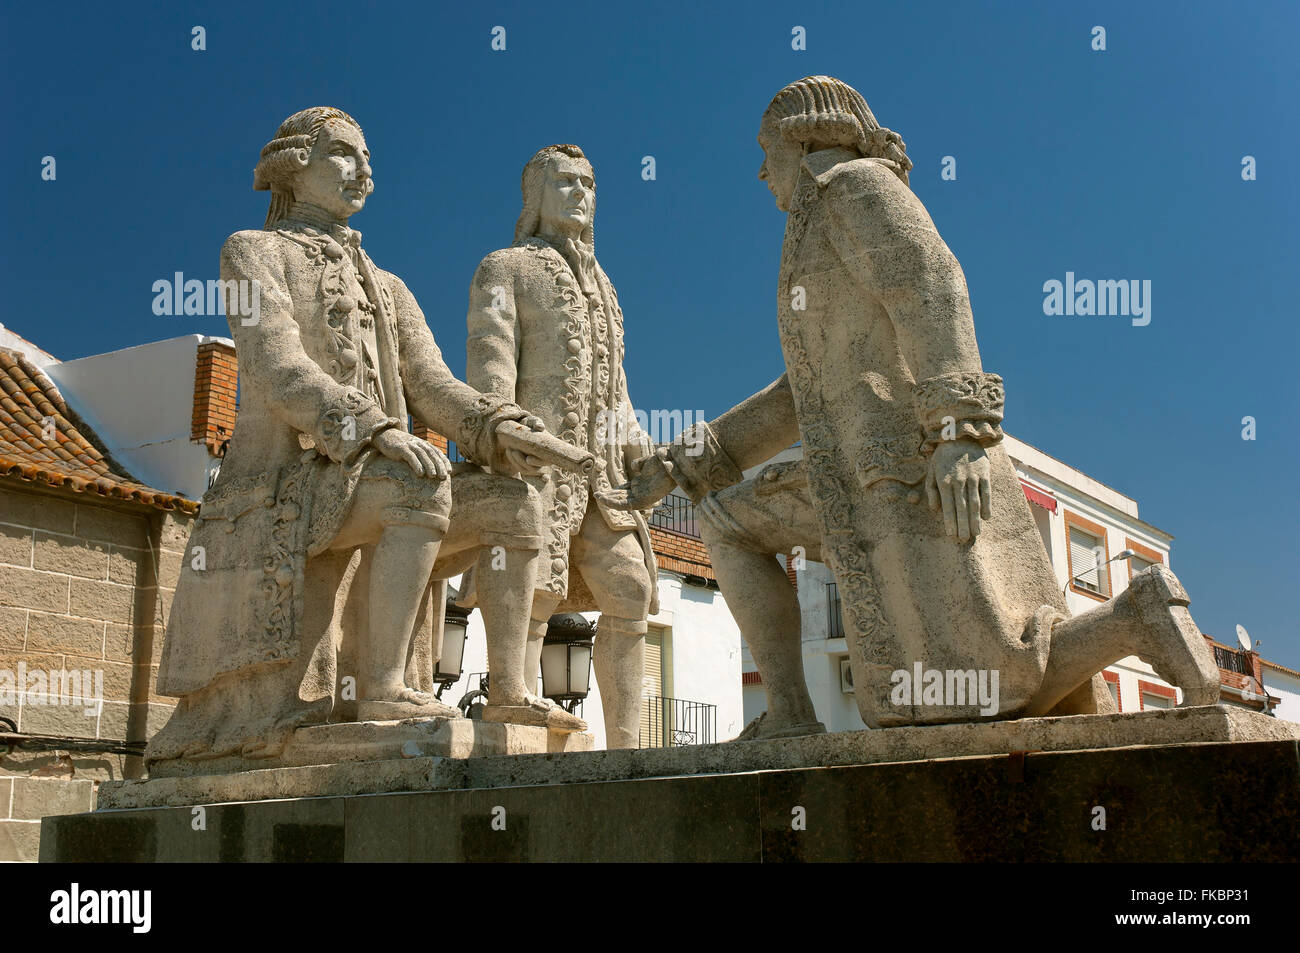 Commemorative monument to the Law of the New Populations, La Carlota, Cordoba province, Region of Andalusia, Spain, Europe Stock Photo